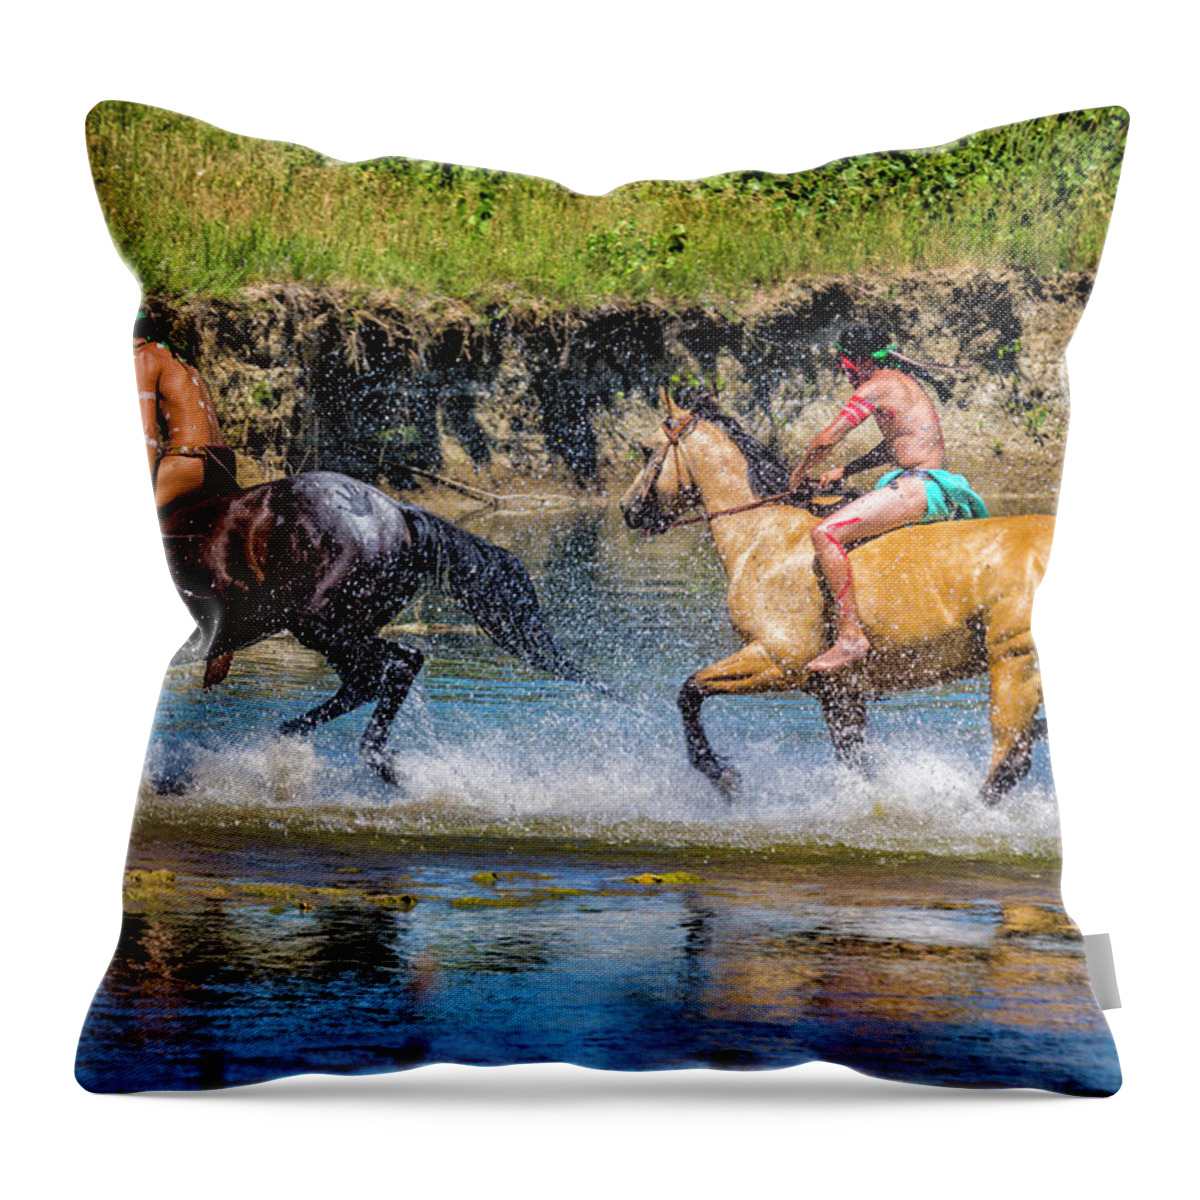 Little Bighorn Re-enactment Throw Pillow featuring the photograph Indian Warriors Crossing Little Bighorn River by Donald Pash